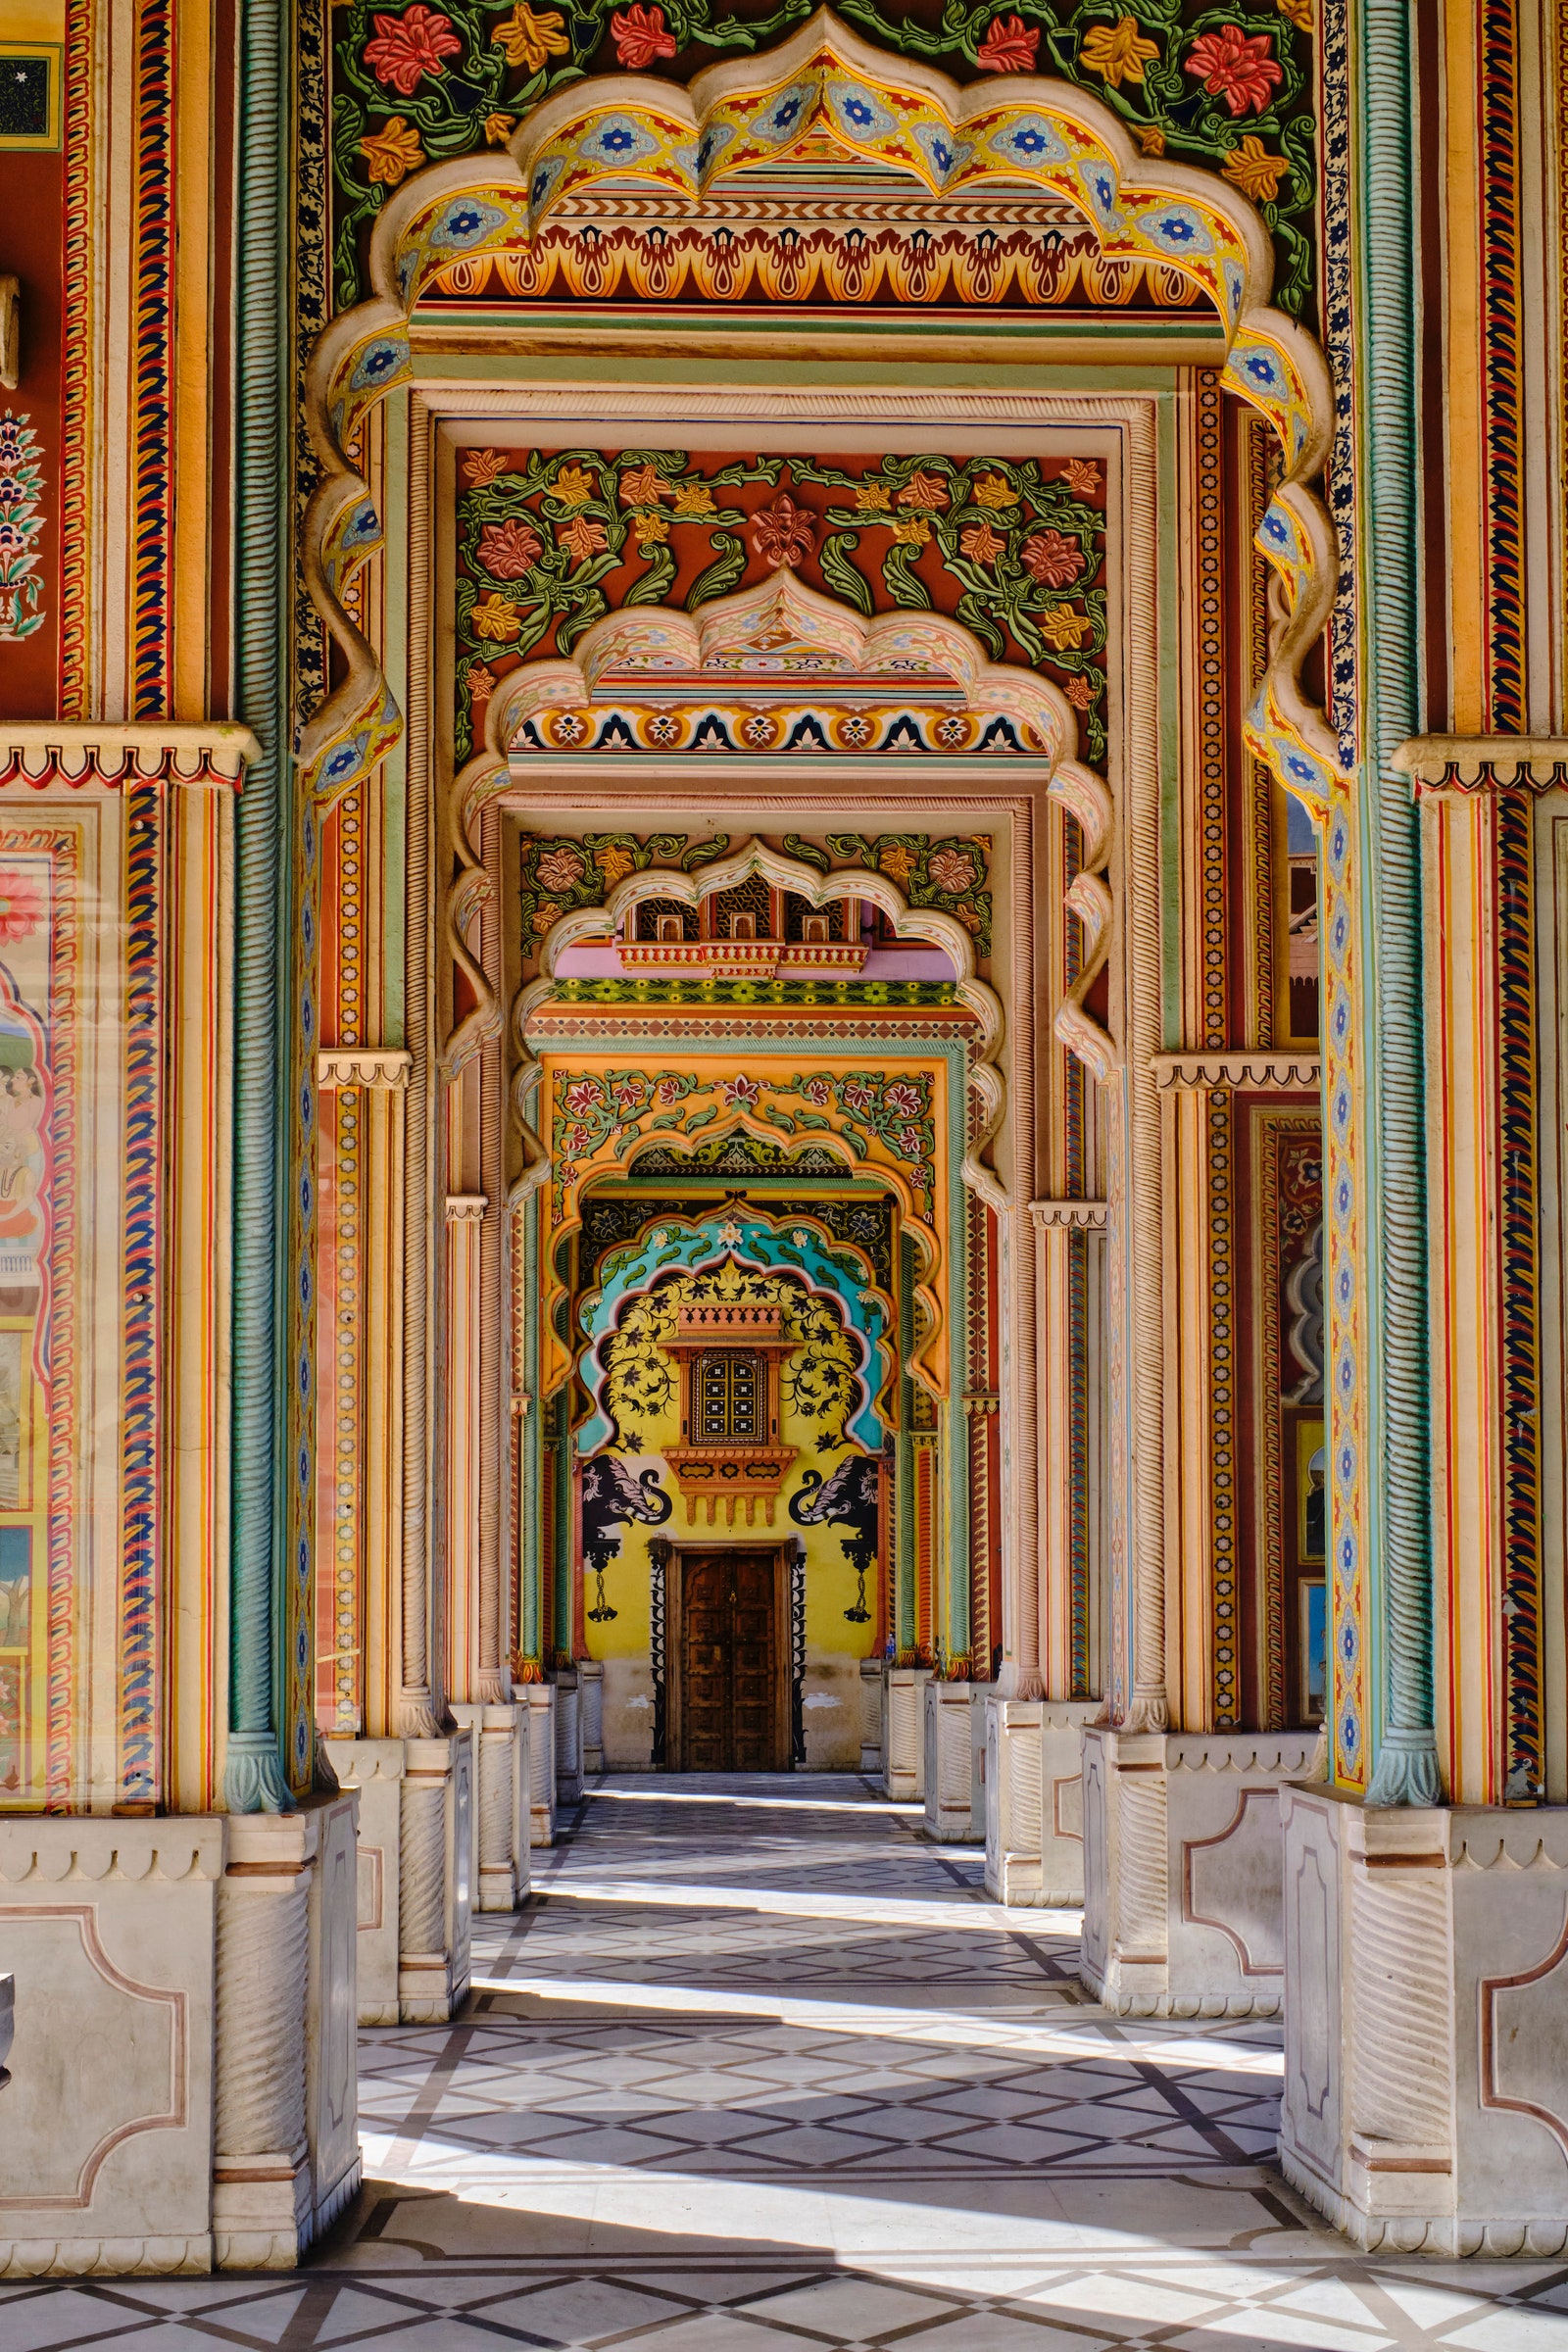 A postcard from India through its fascinating architecture